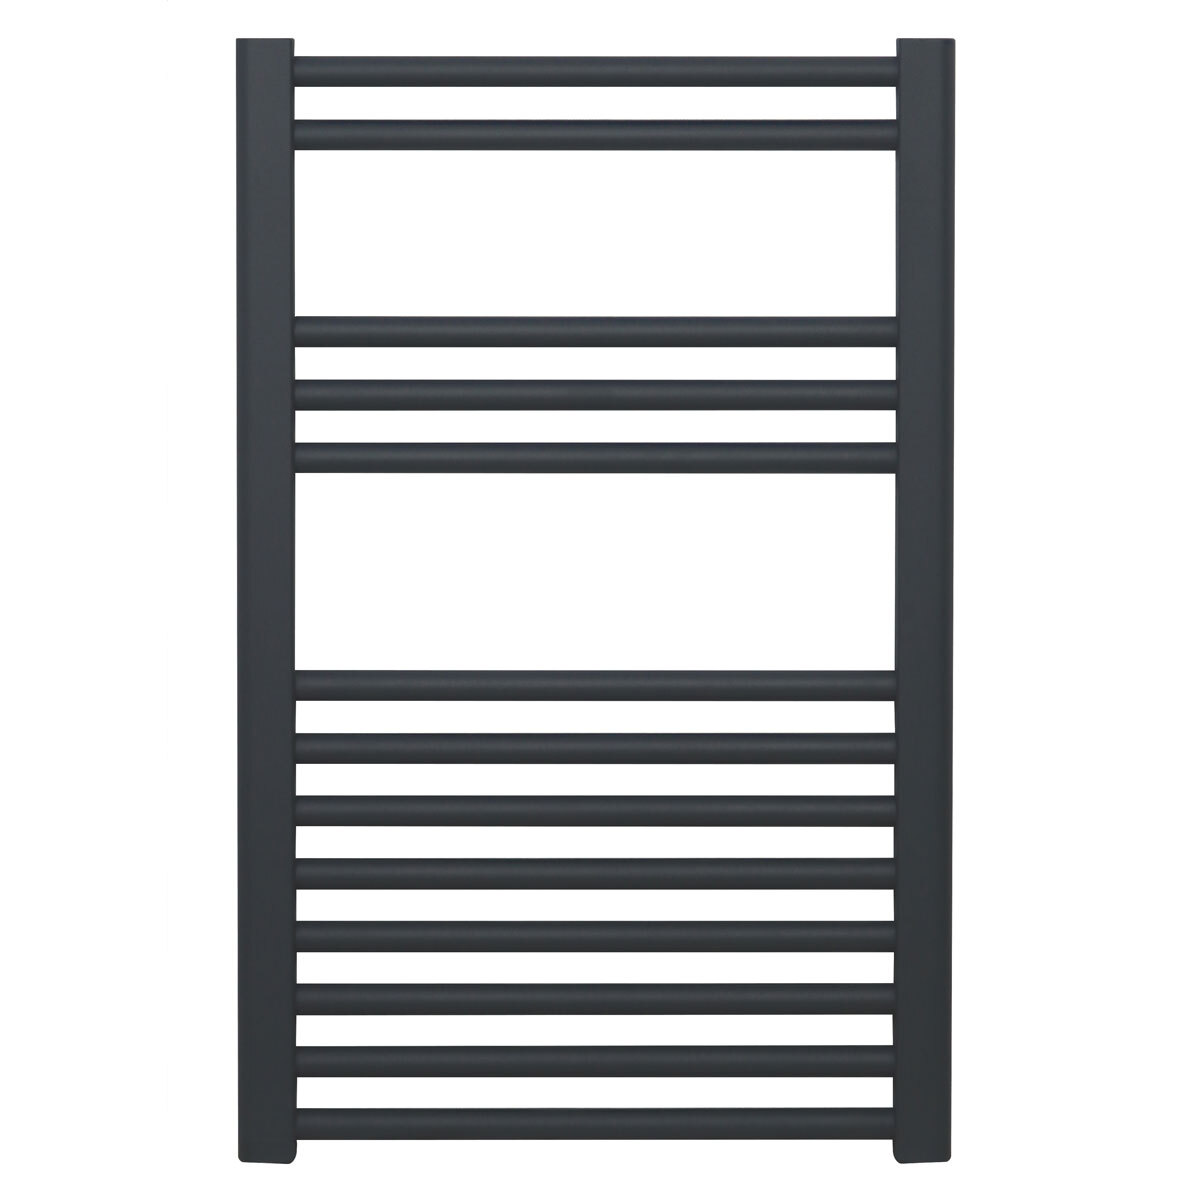 Cut out image of radiator on white background